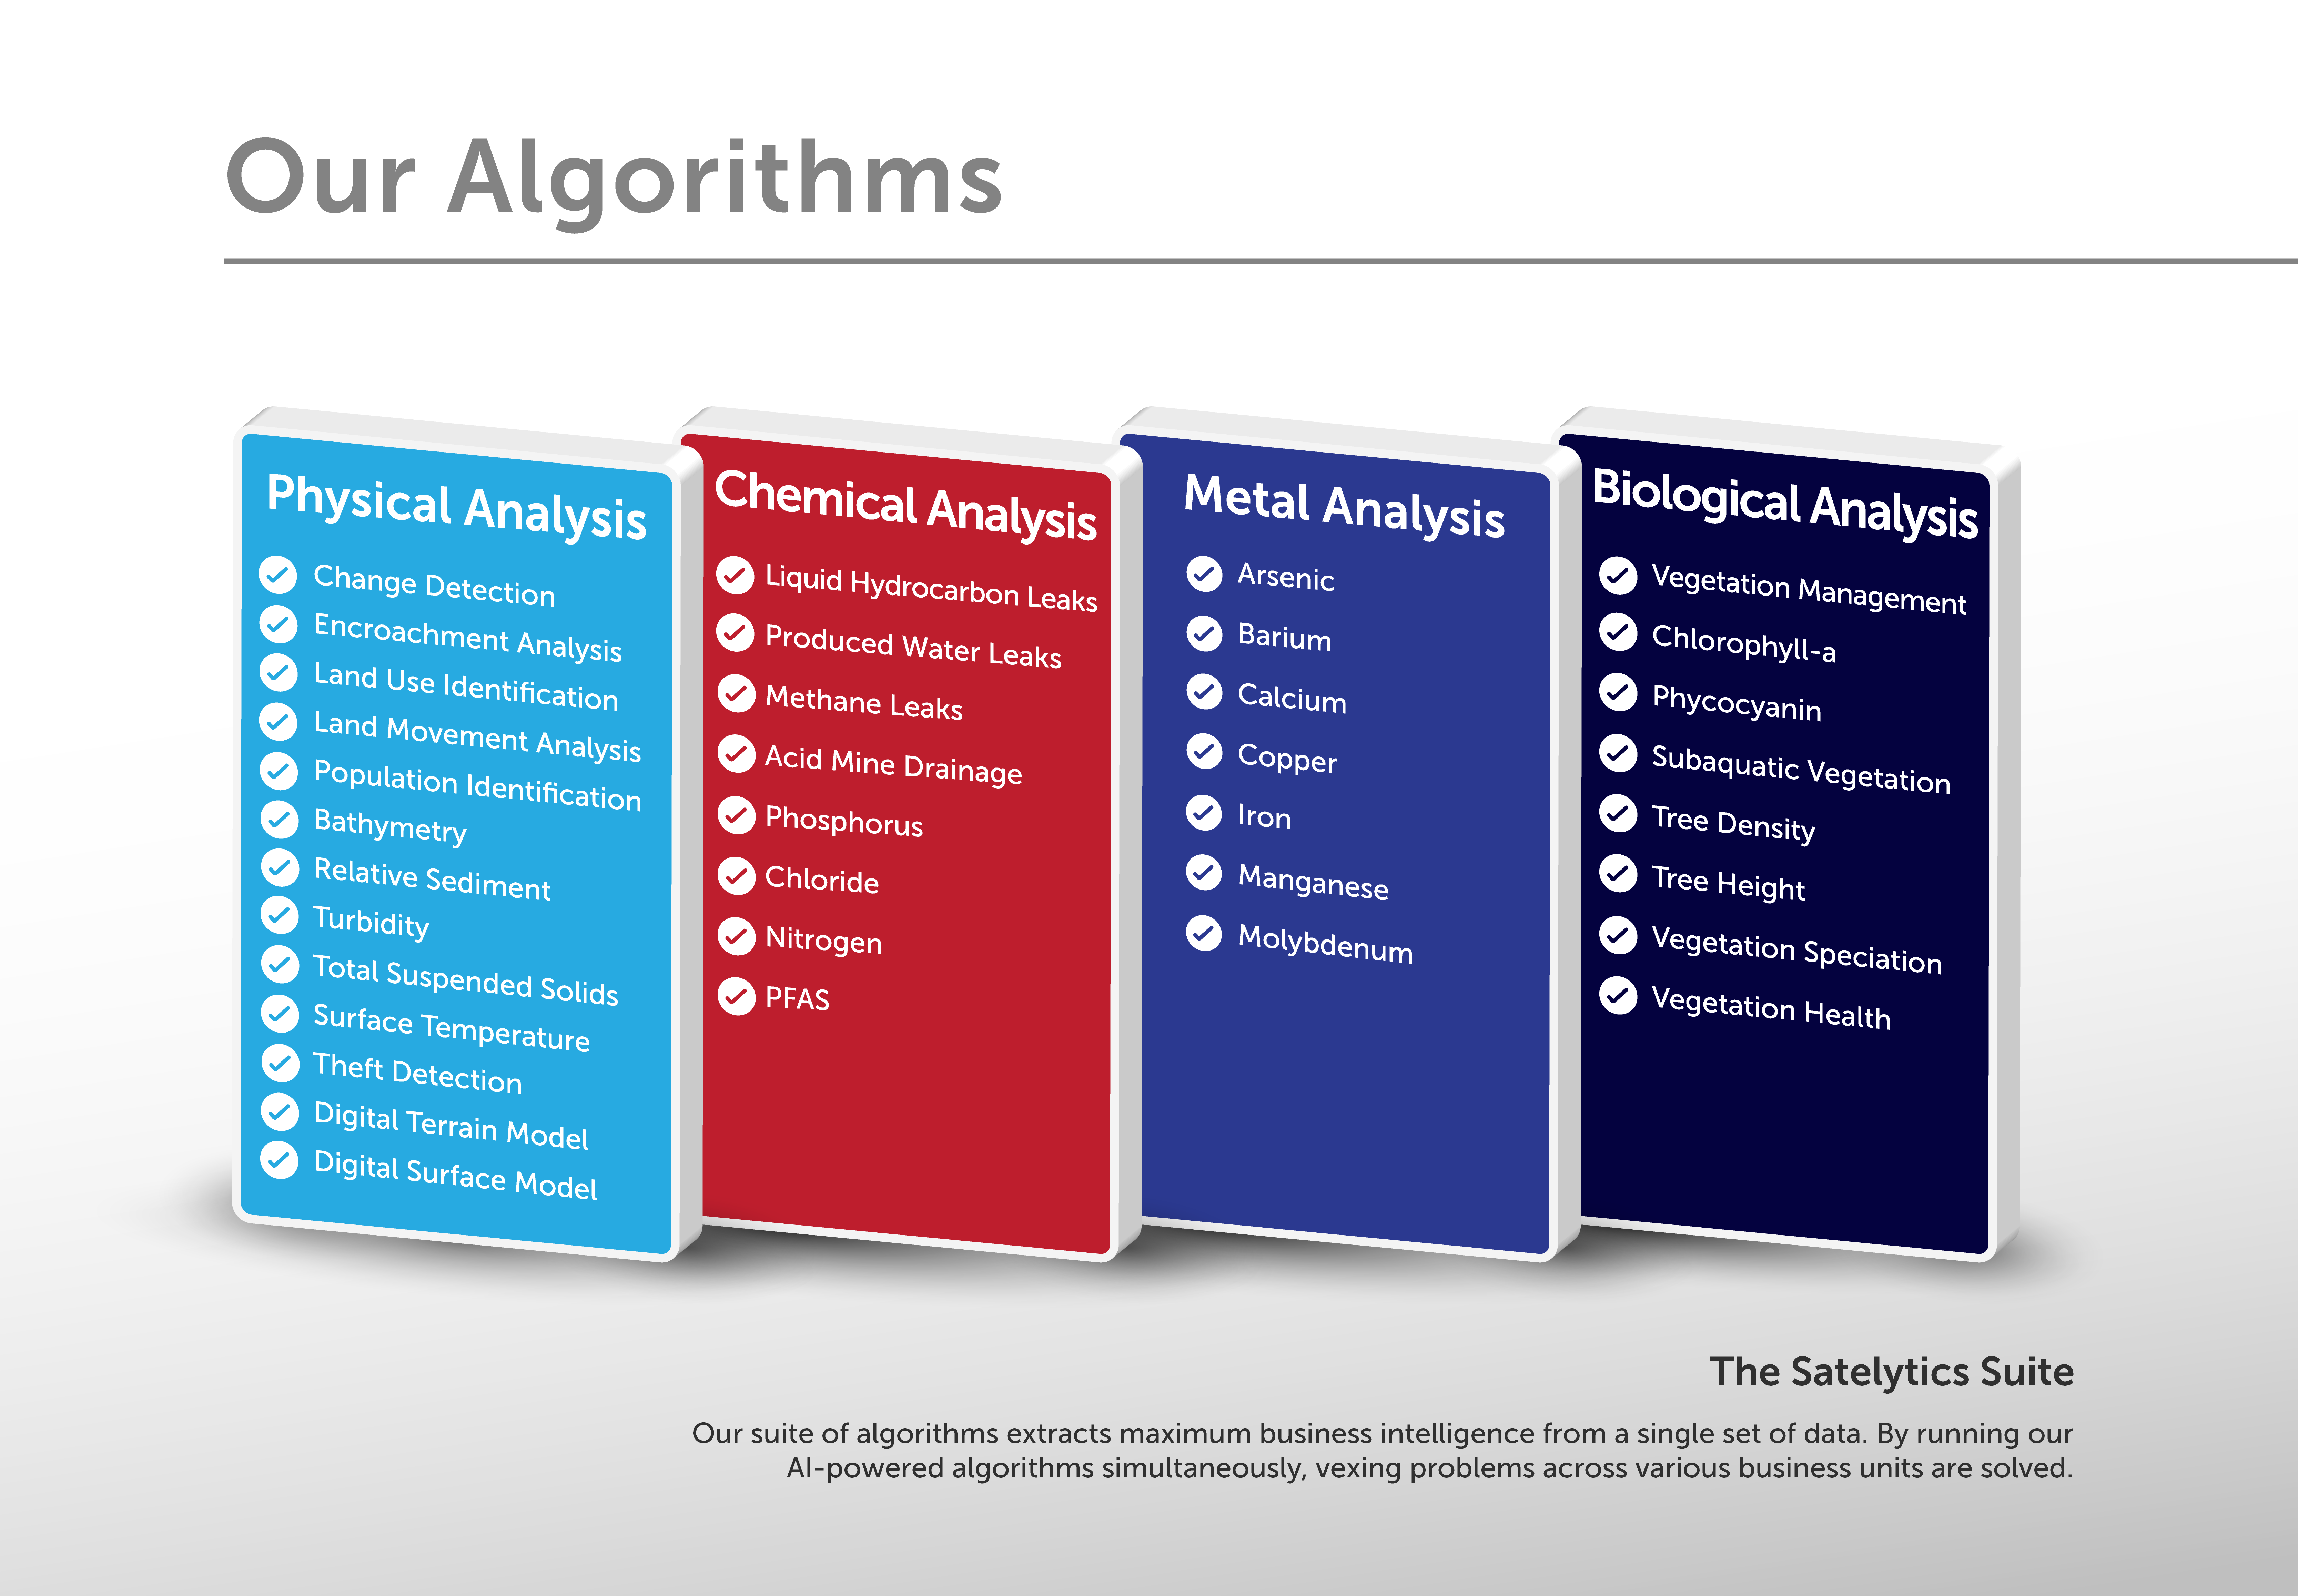 Analyze a Single Set of Data to Solve Multiple Problems with Over Forty Algorithms.